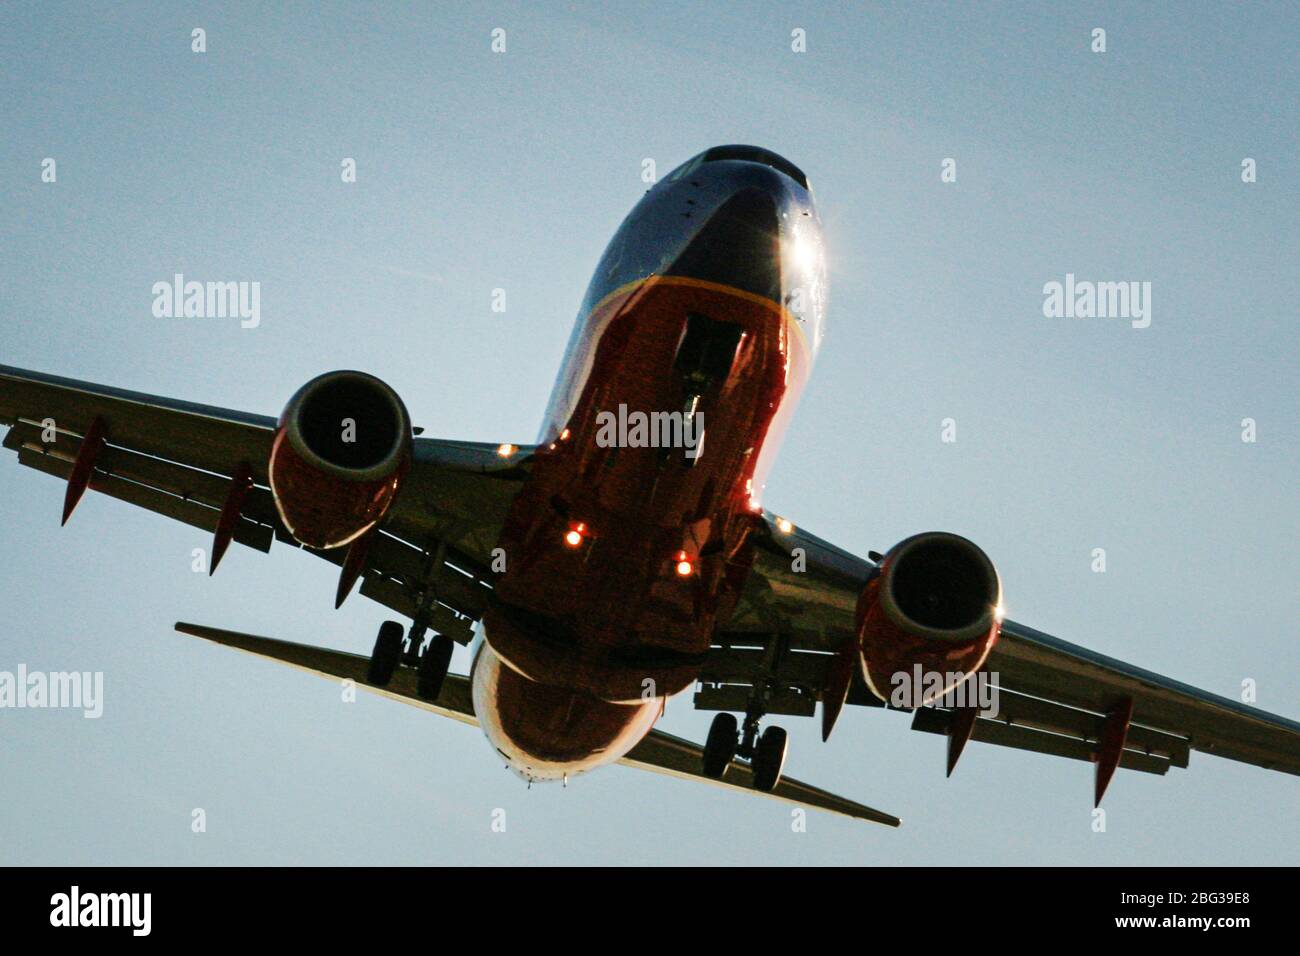 Airplane in the process of landing on runway Stock Photo